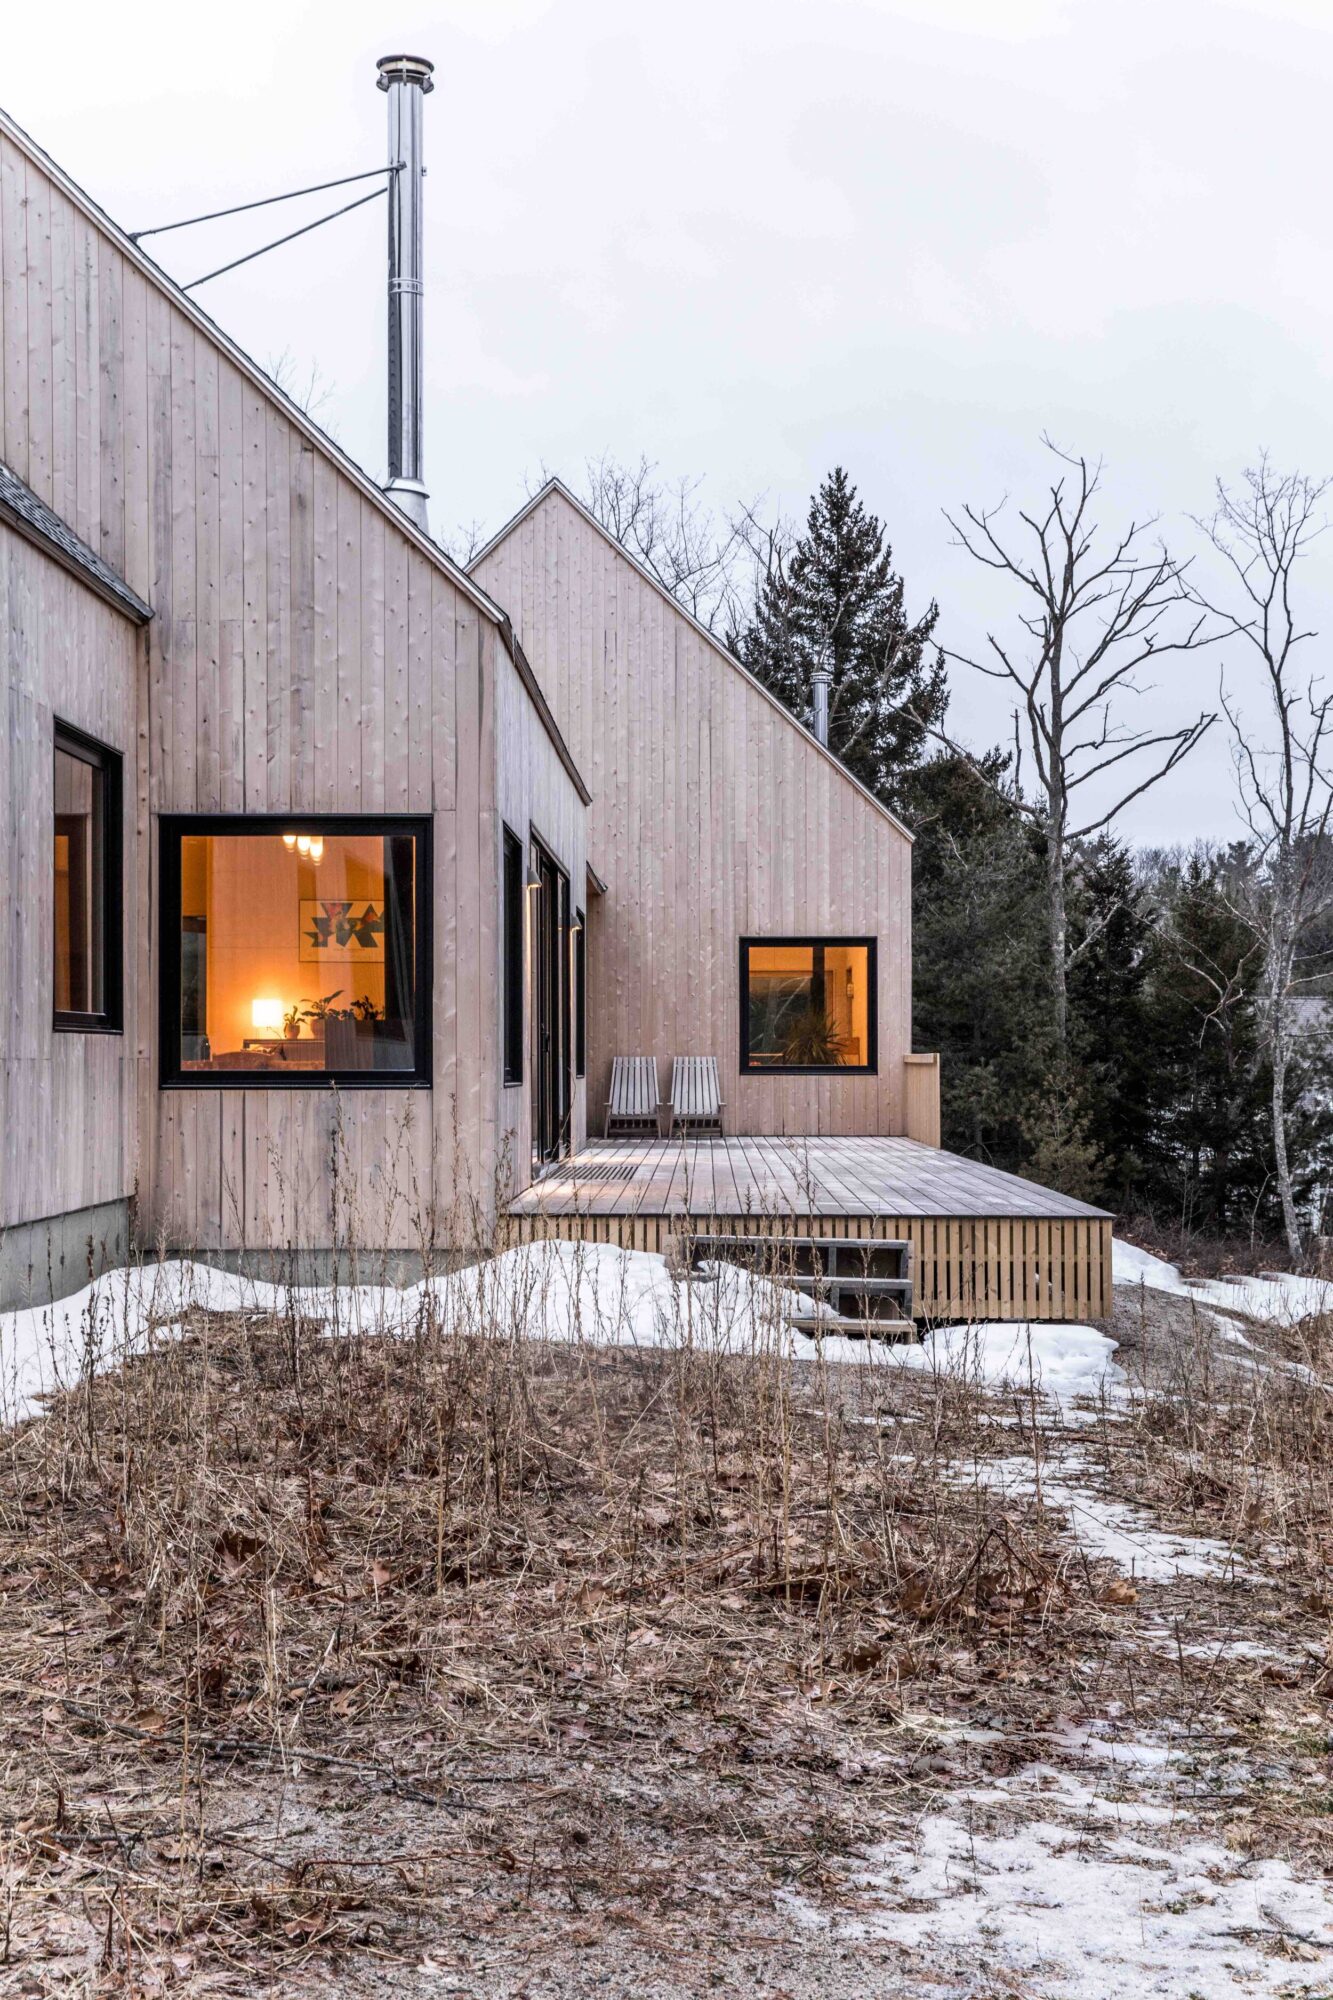  The home’s staggered gables, inspired by Nordic design, give it a clean, geometric profile. 